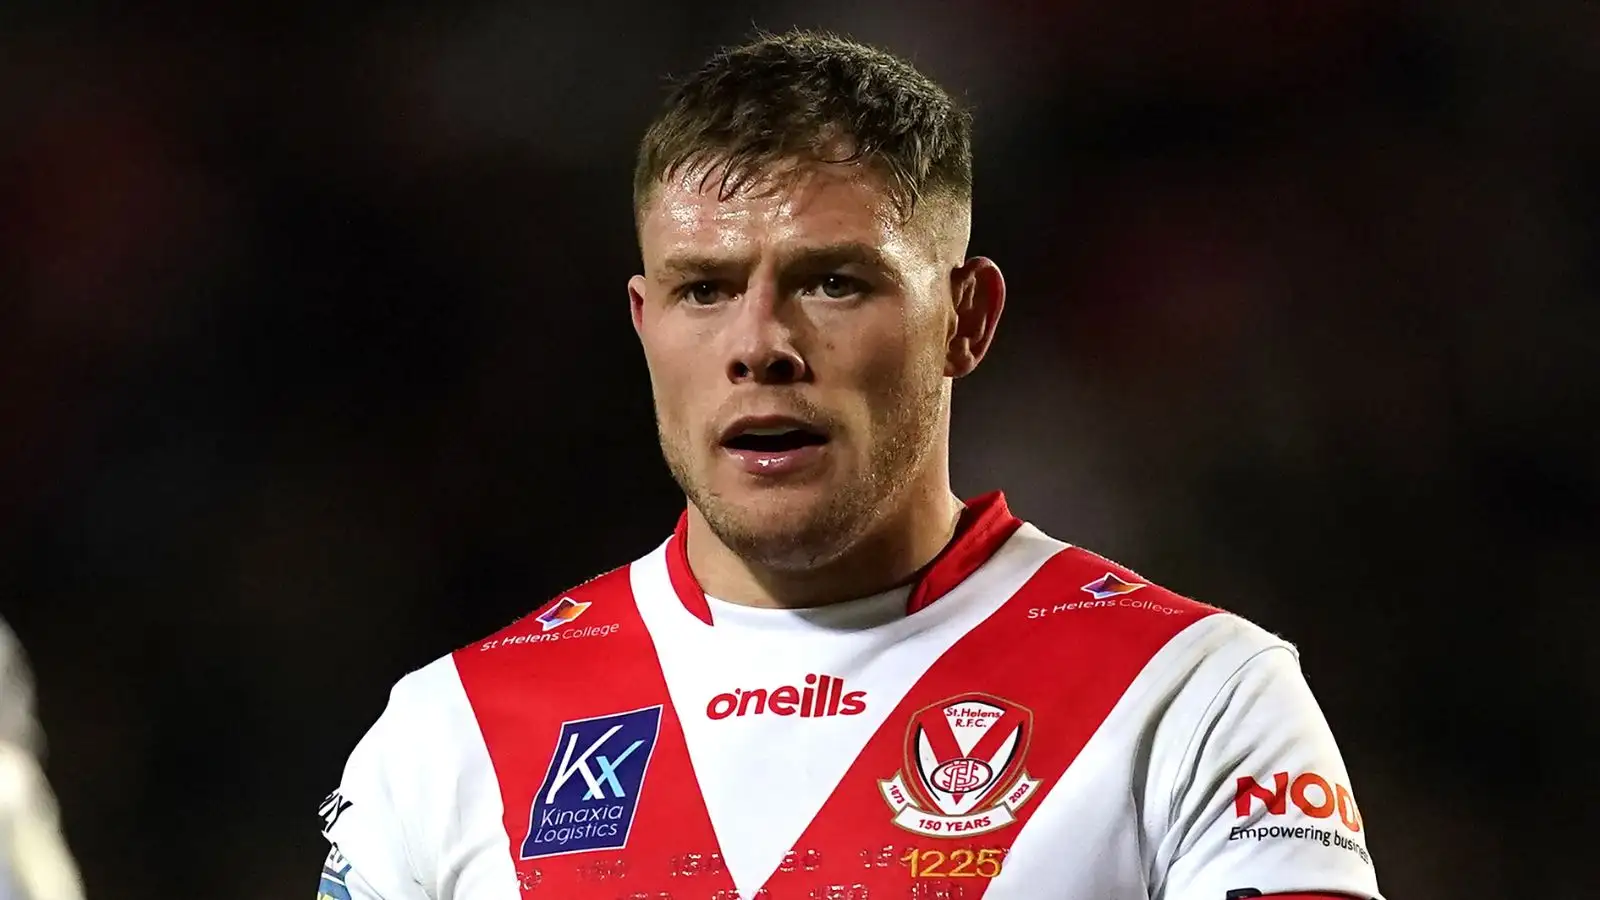 St Helens to appeal Morgan Knowles suspension